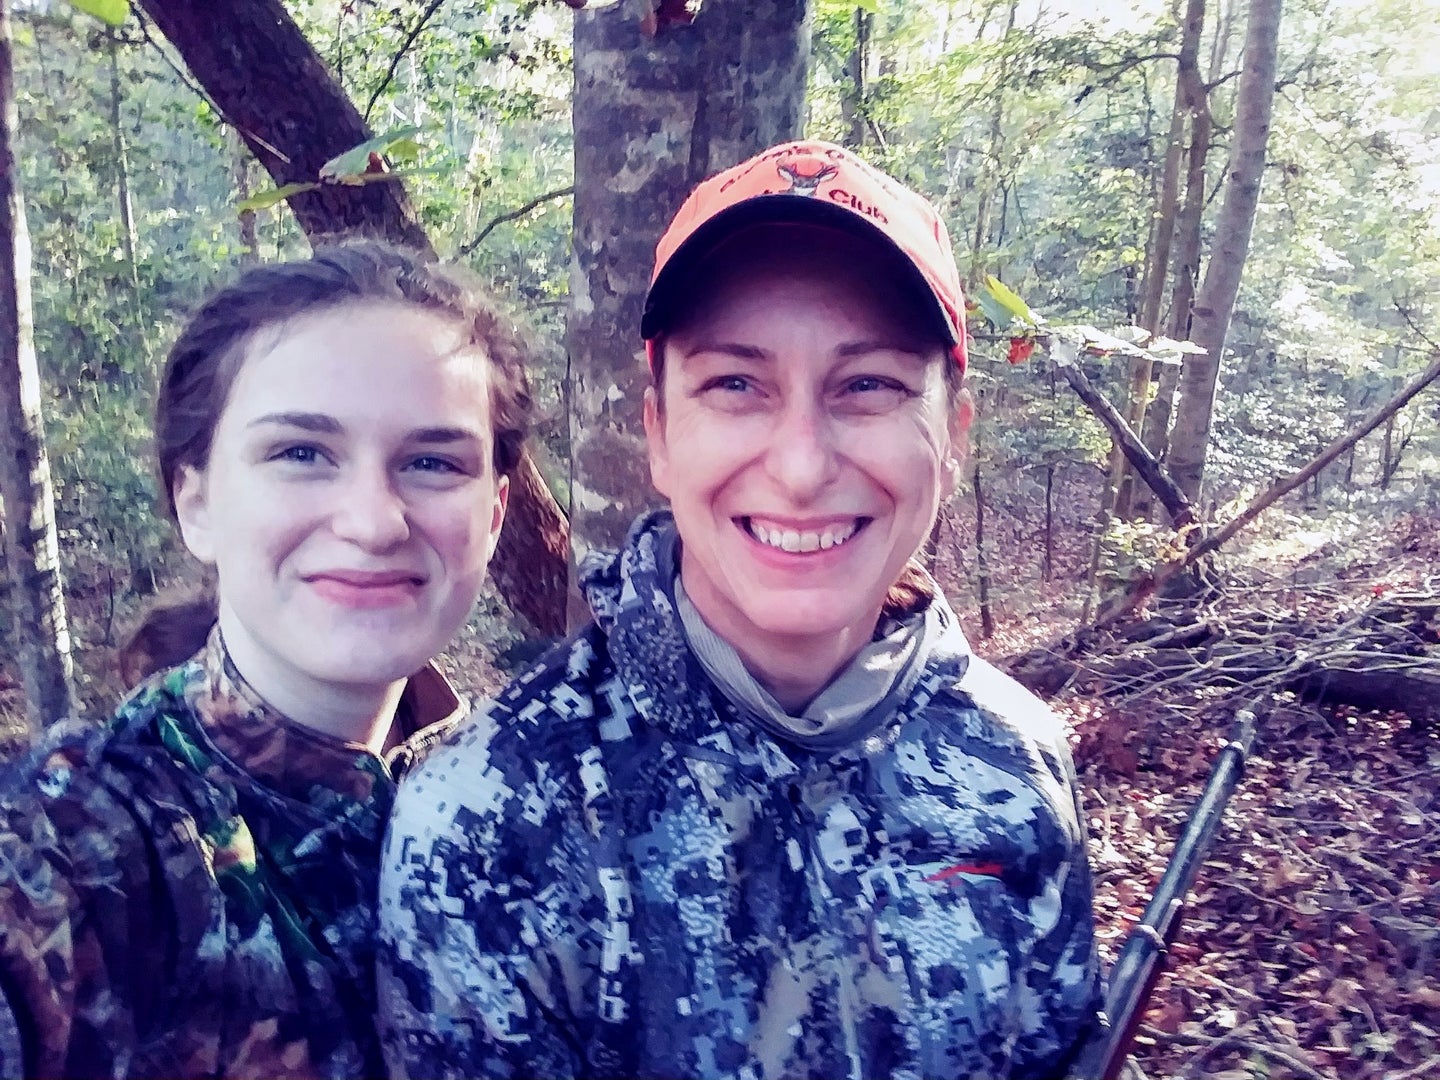 A mother and her daughter dressed in camouflage in the woods.